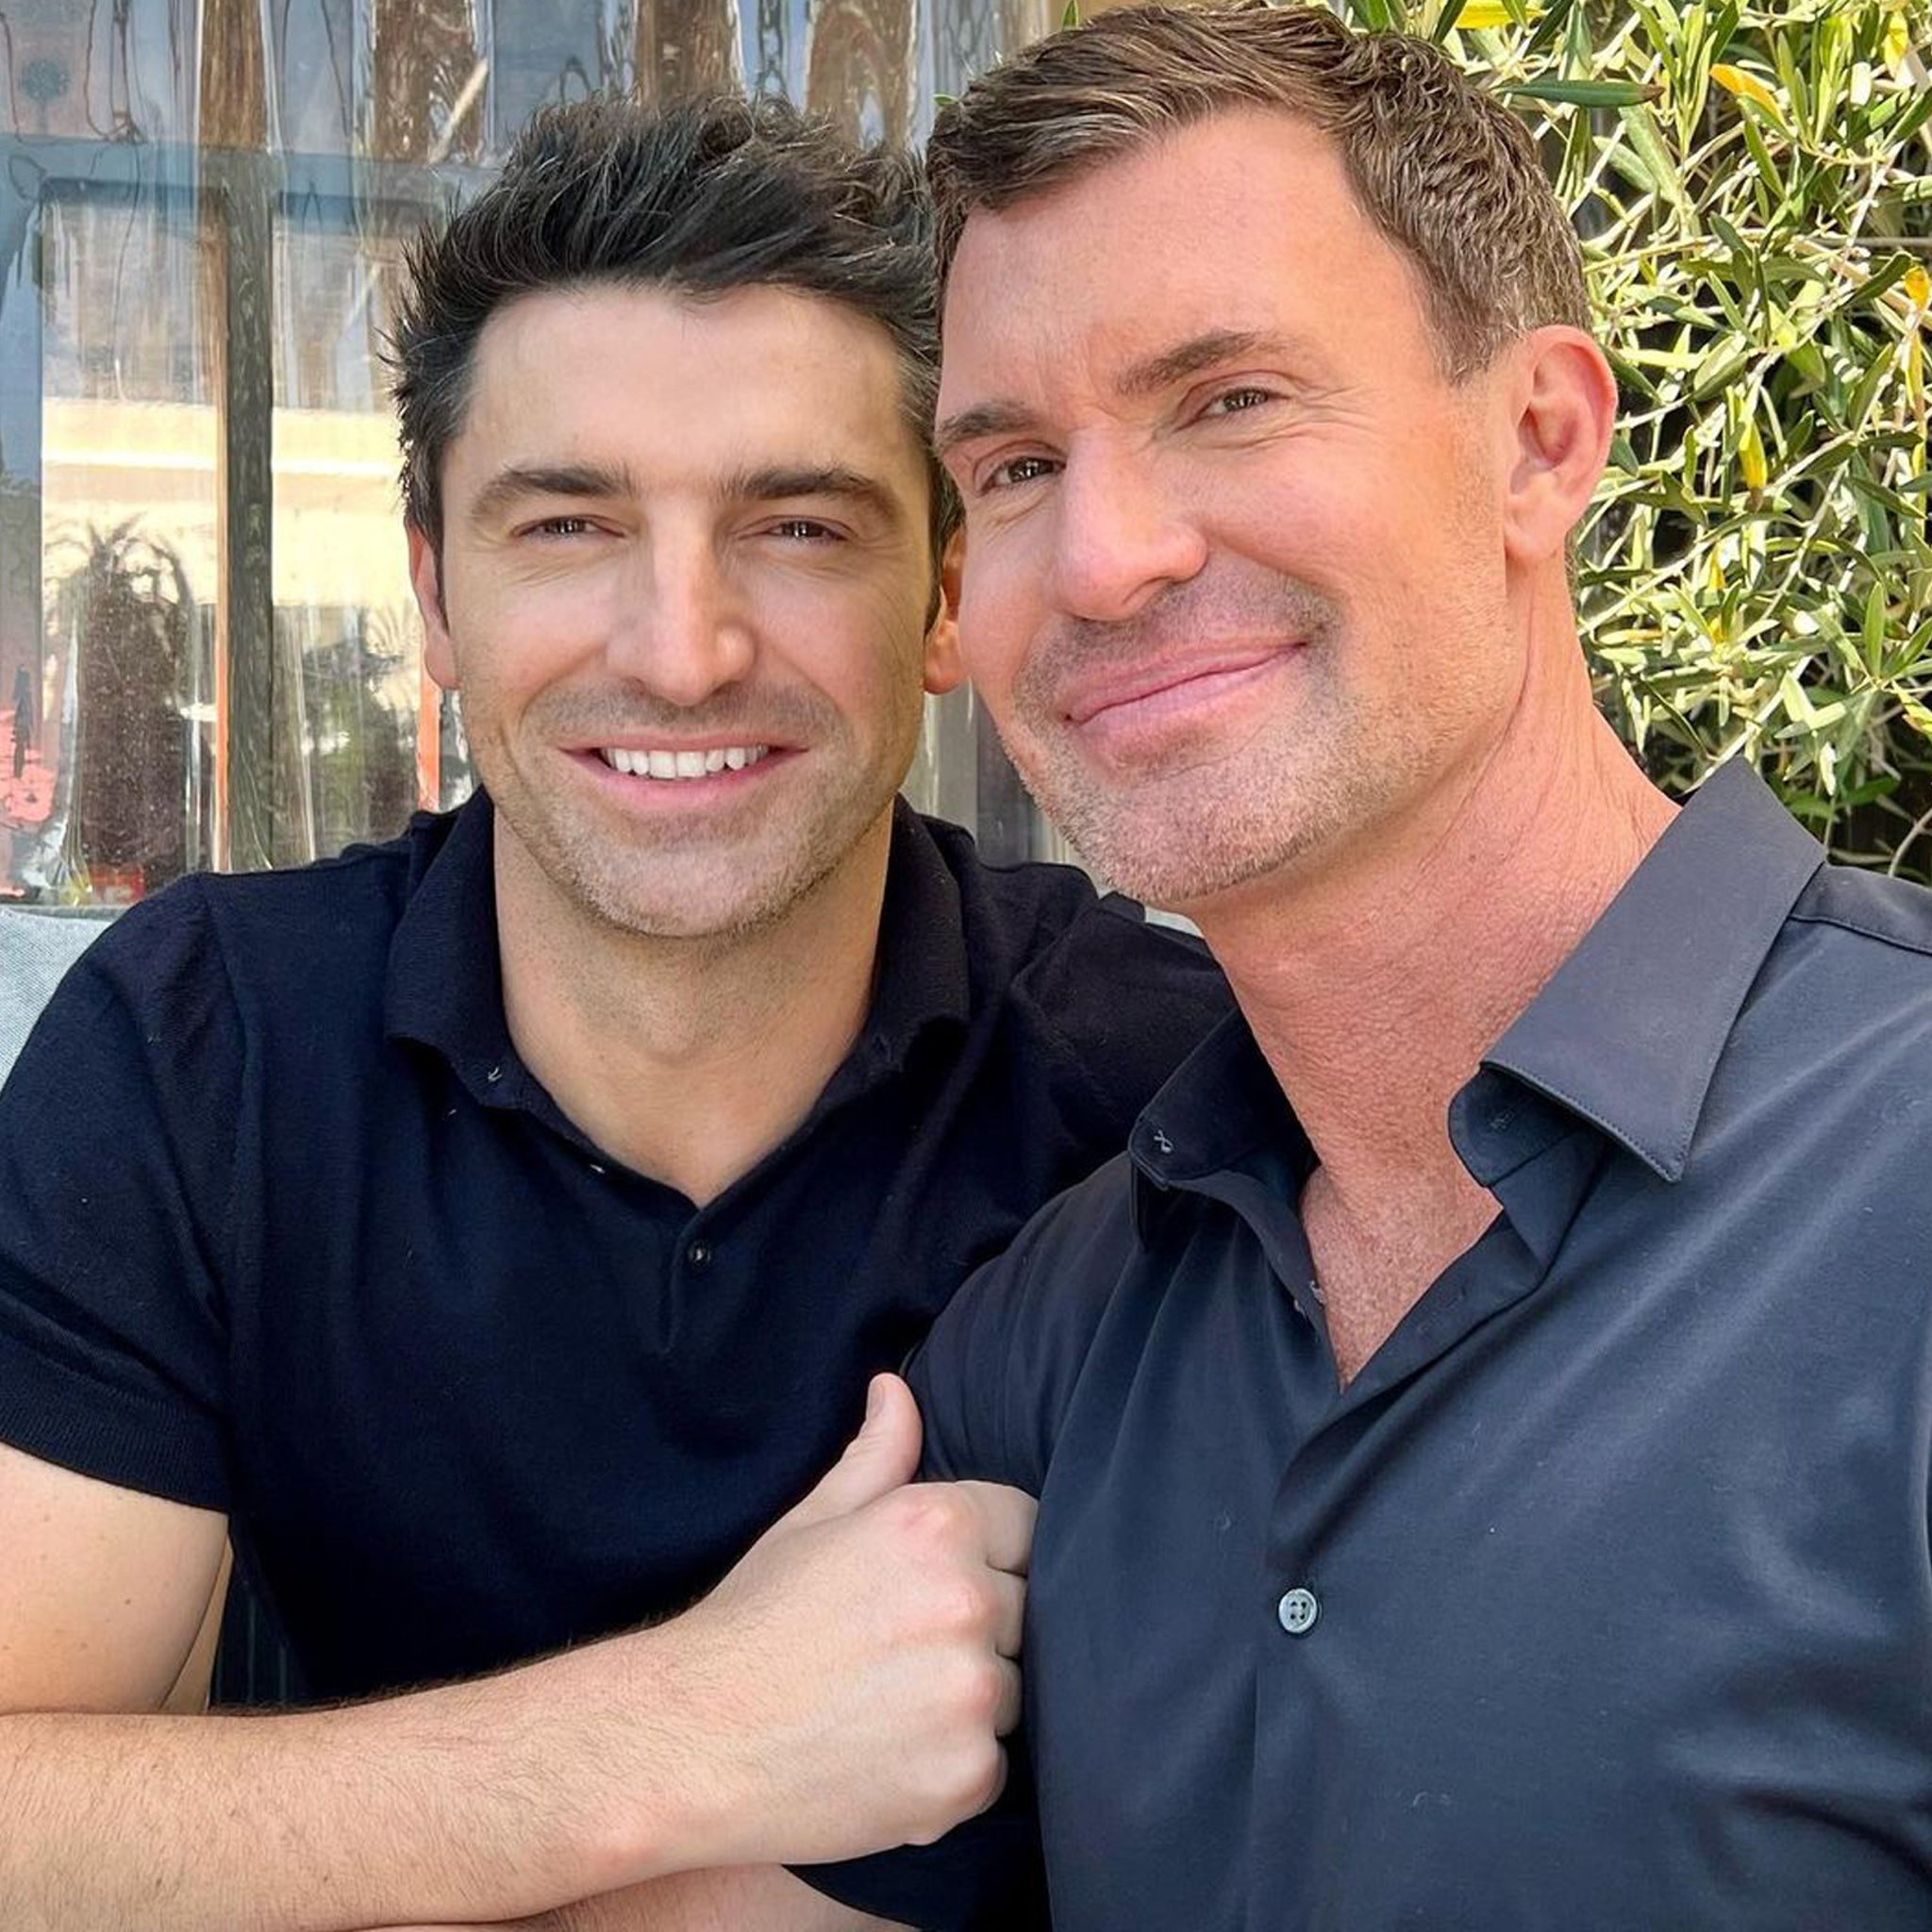 Jeff Lewis and Chef Stuart O'Keeffe Are Dating